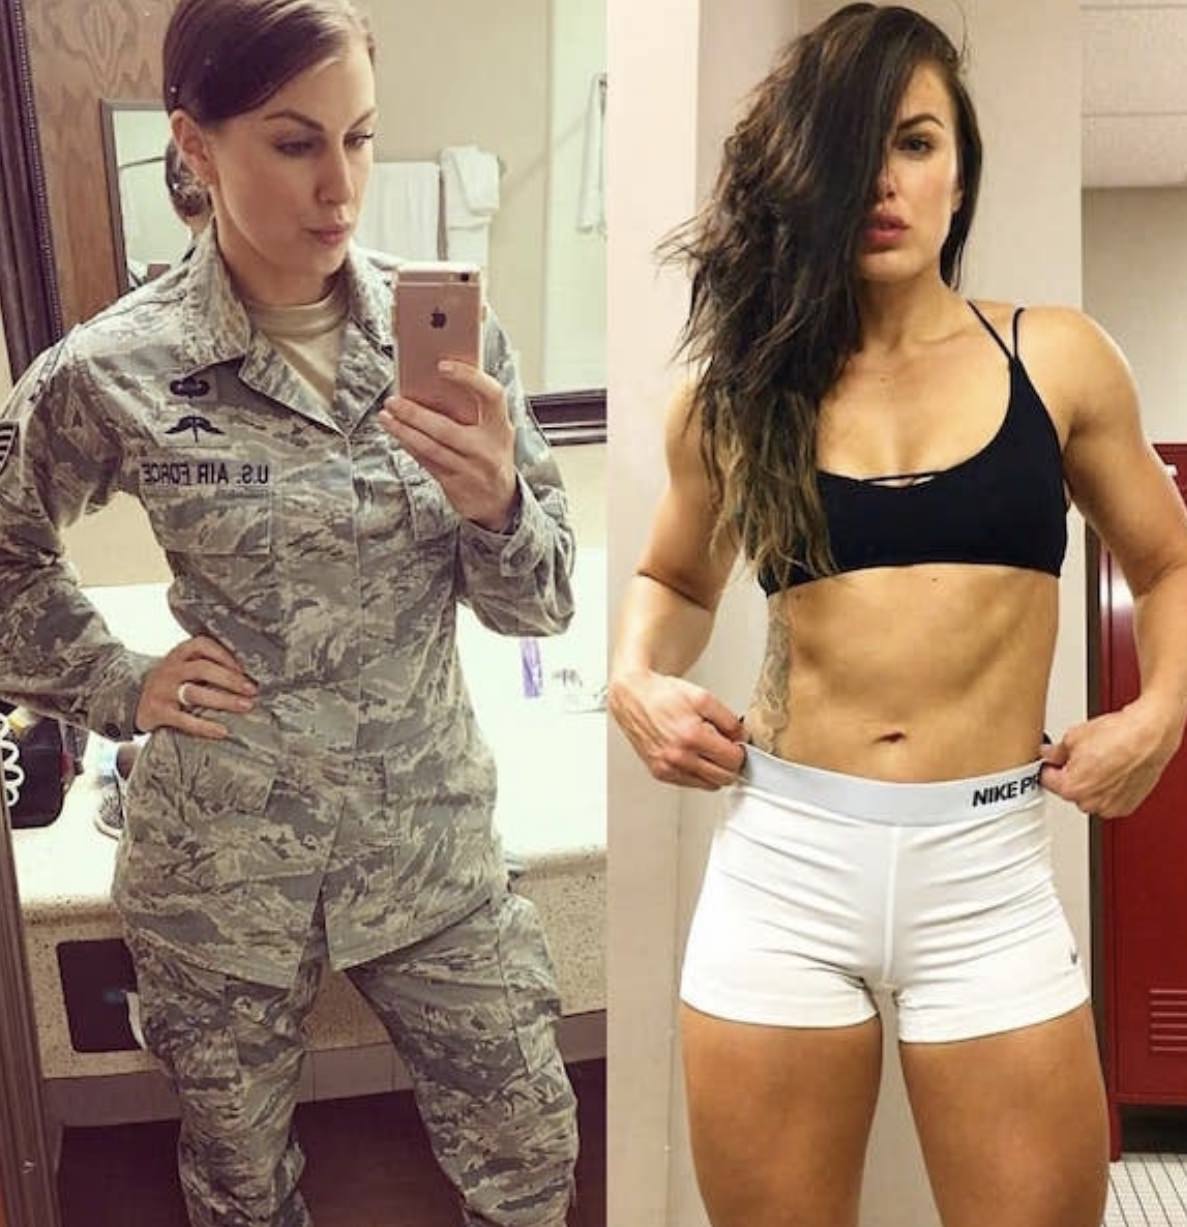 Sexy military woman in her fatigues and another picture of her with abs, sports bar and running shorts